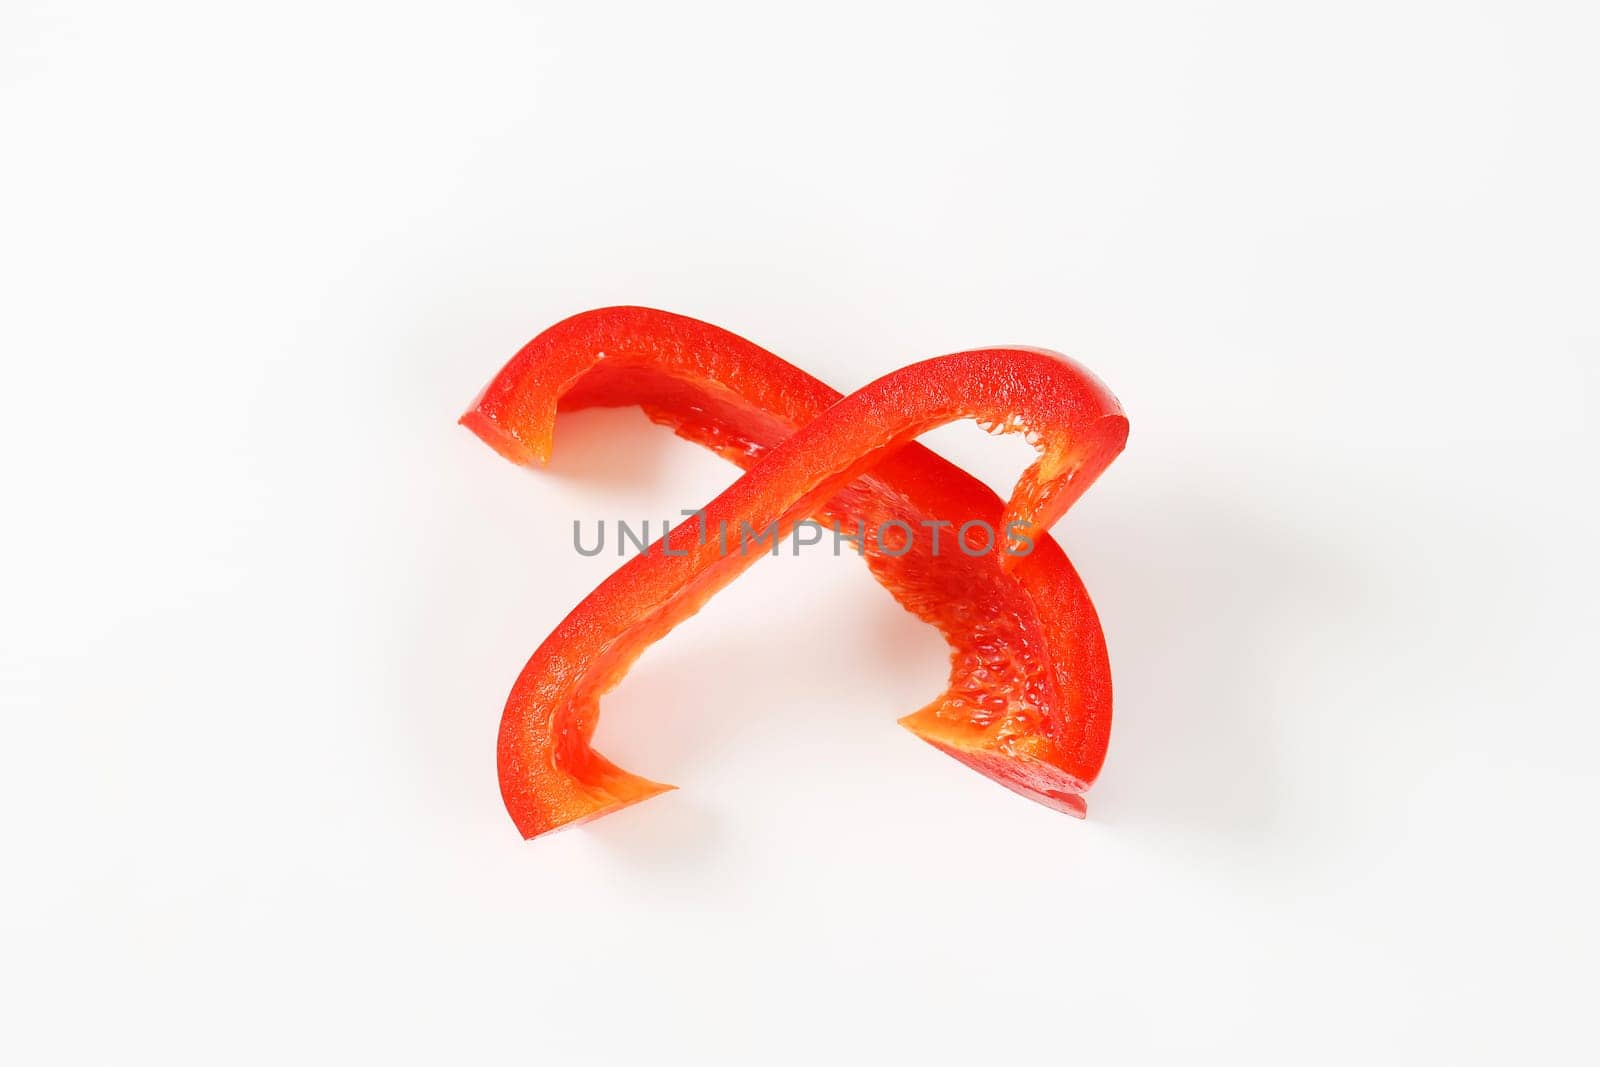 Two slices of red bell pepper by Digifoodstock